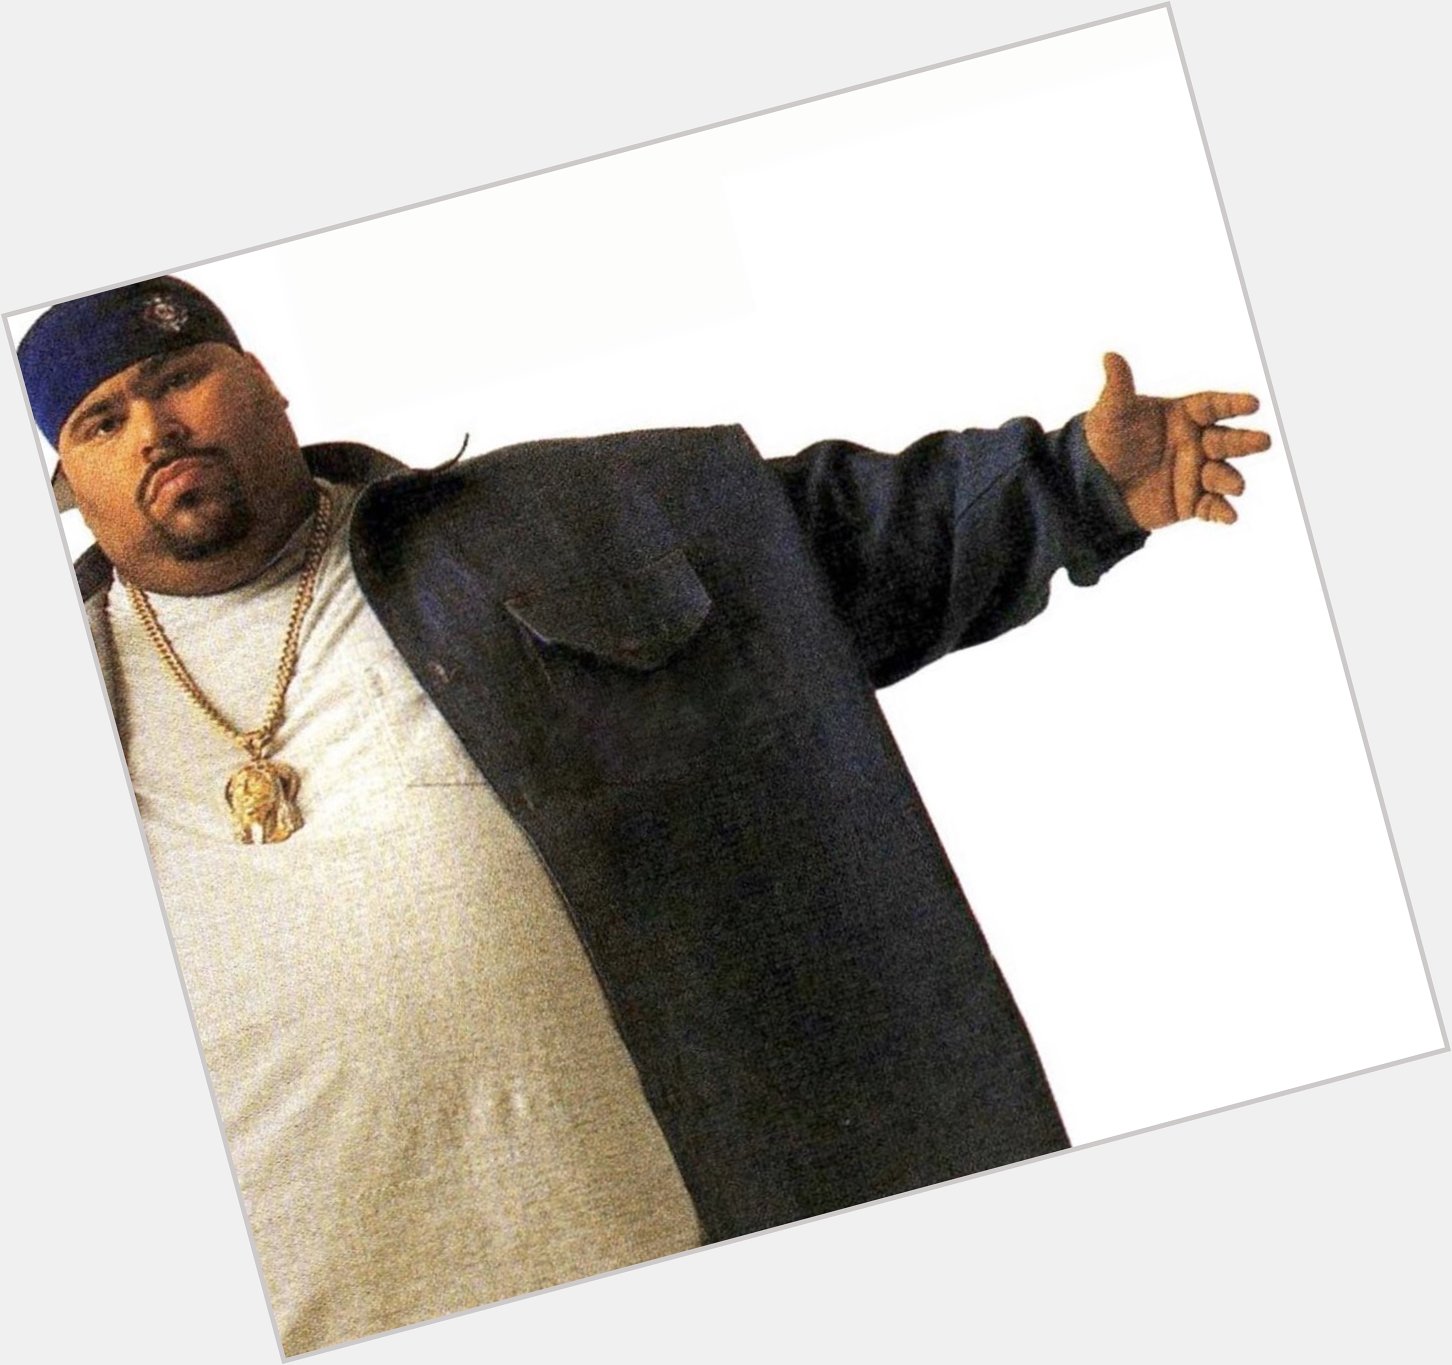 Happy birthday to the legend Big Pun what s your favorite song from him? 